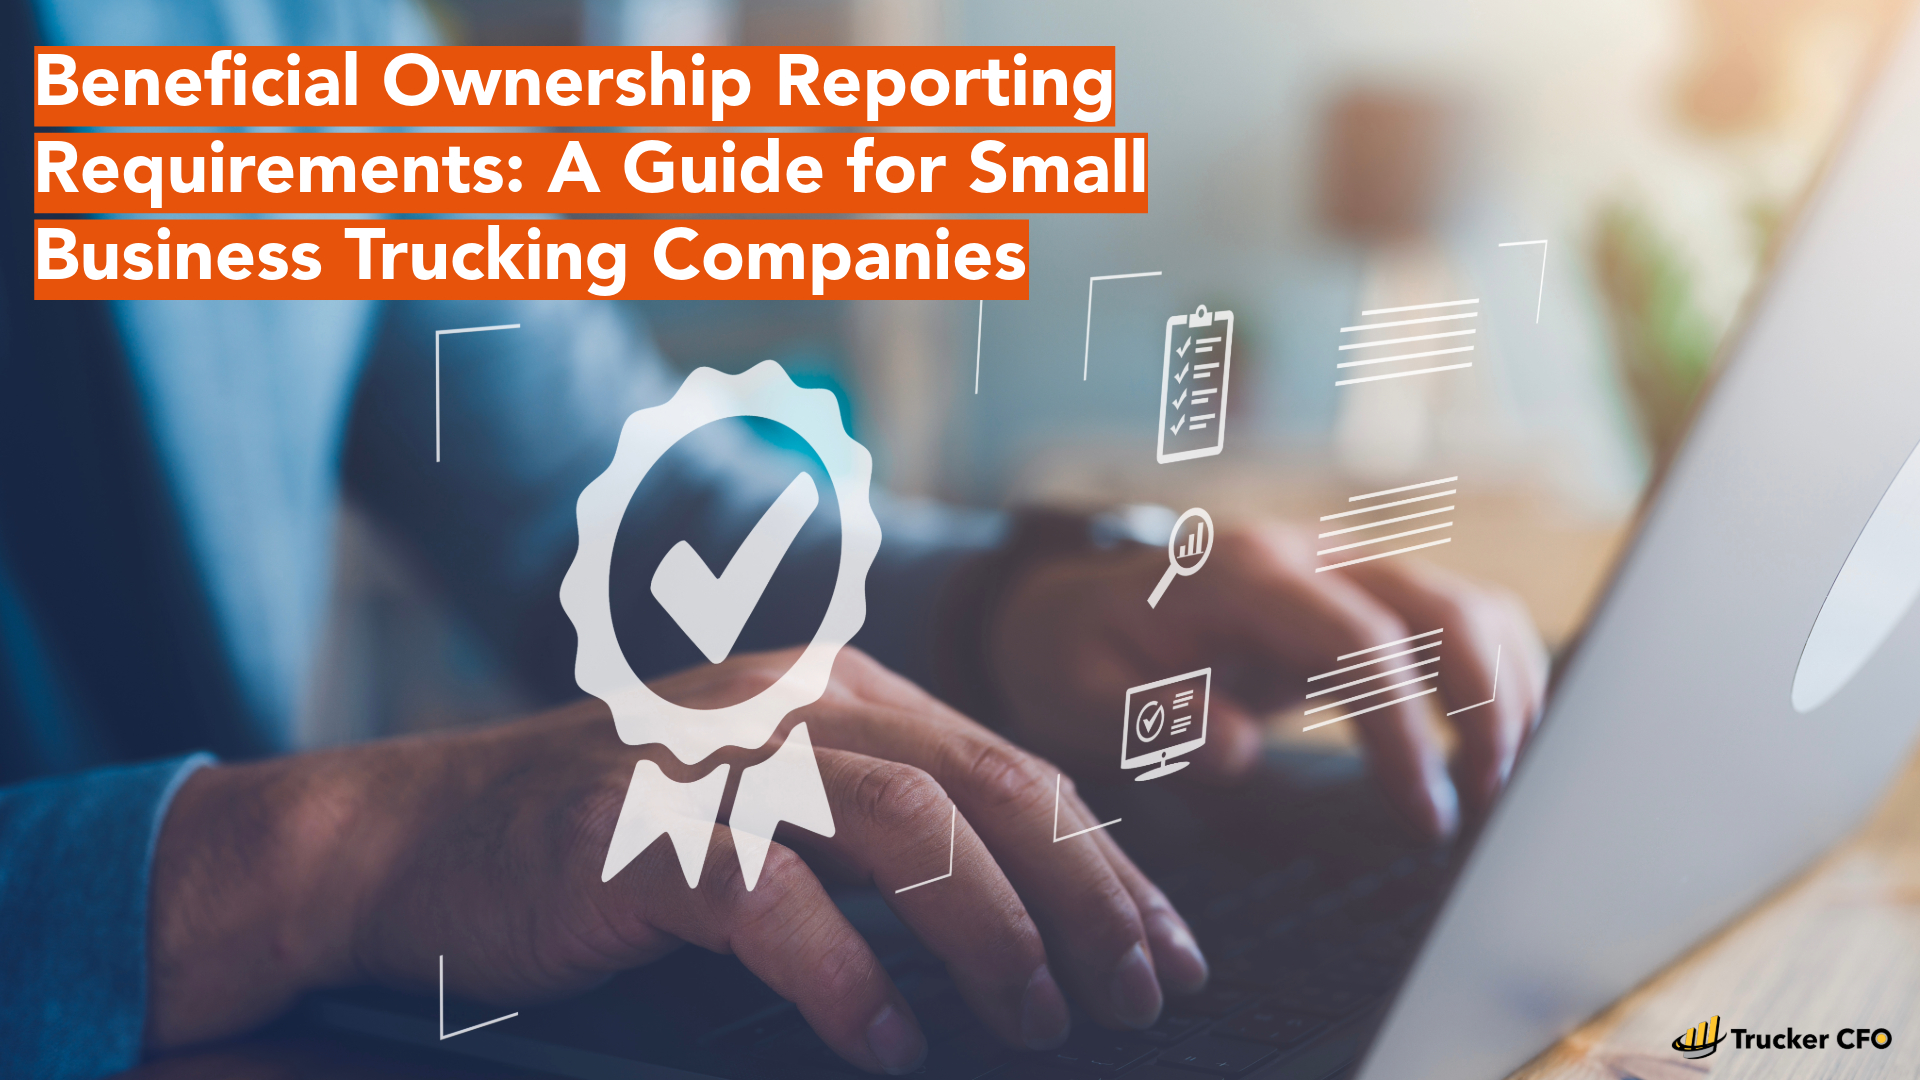 Beneficial Ownership Reporting Requirements: A Guide for Small Business Trucking Companies